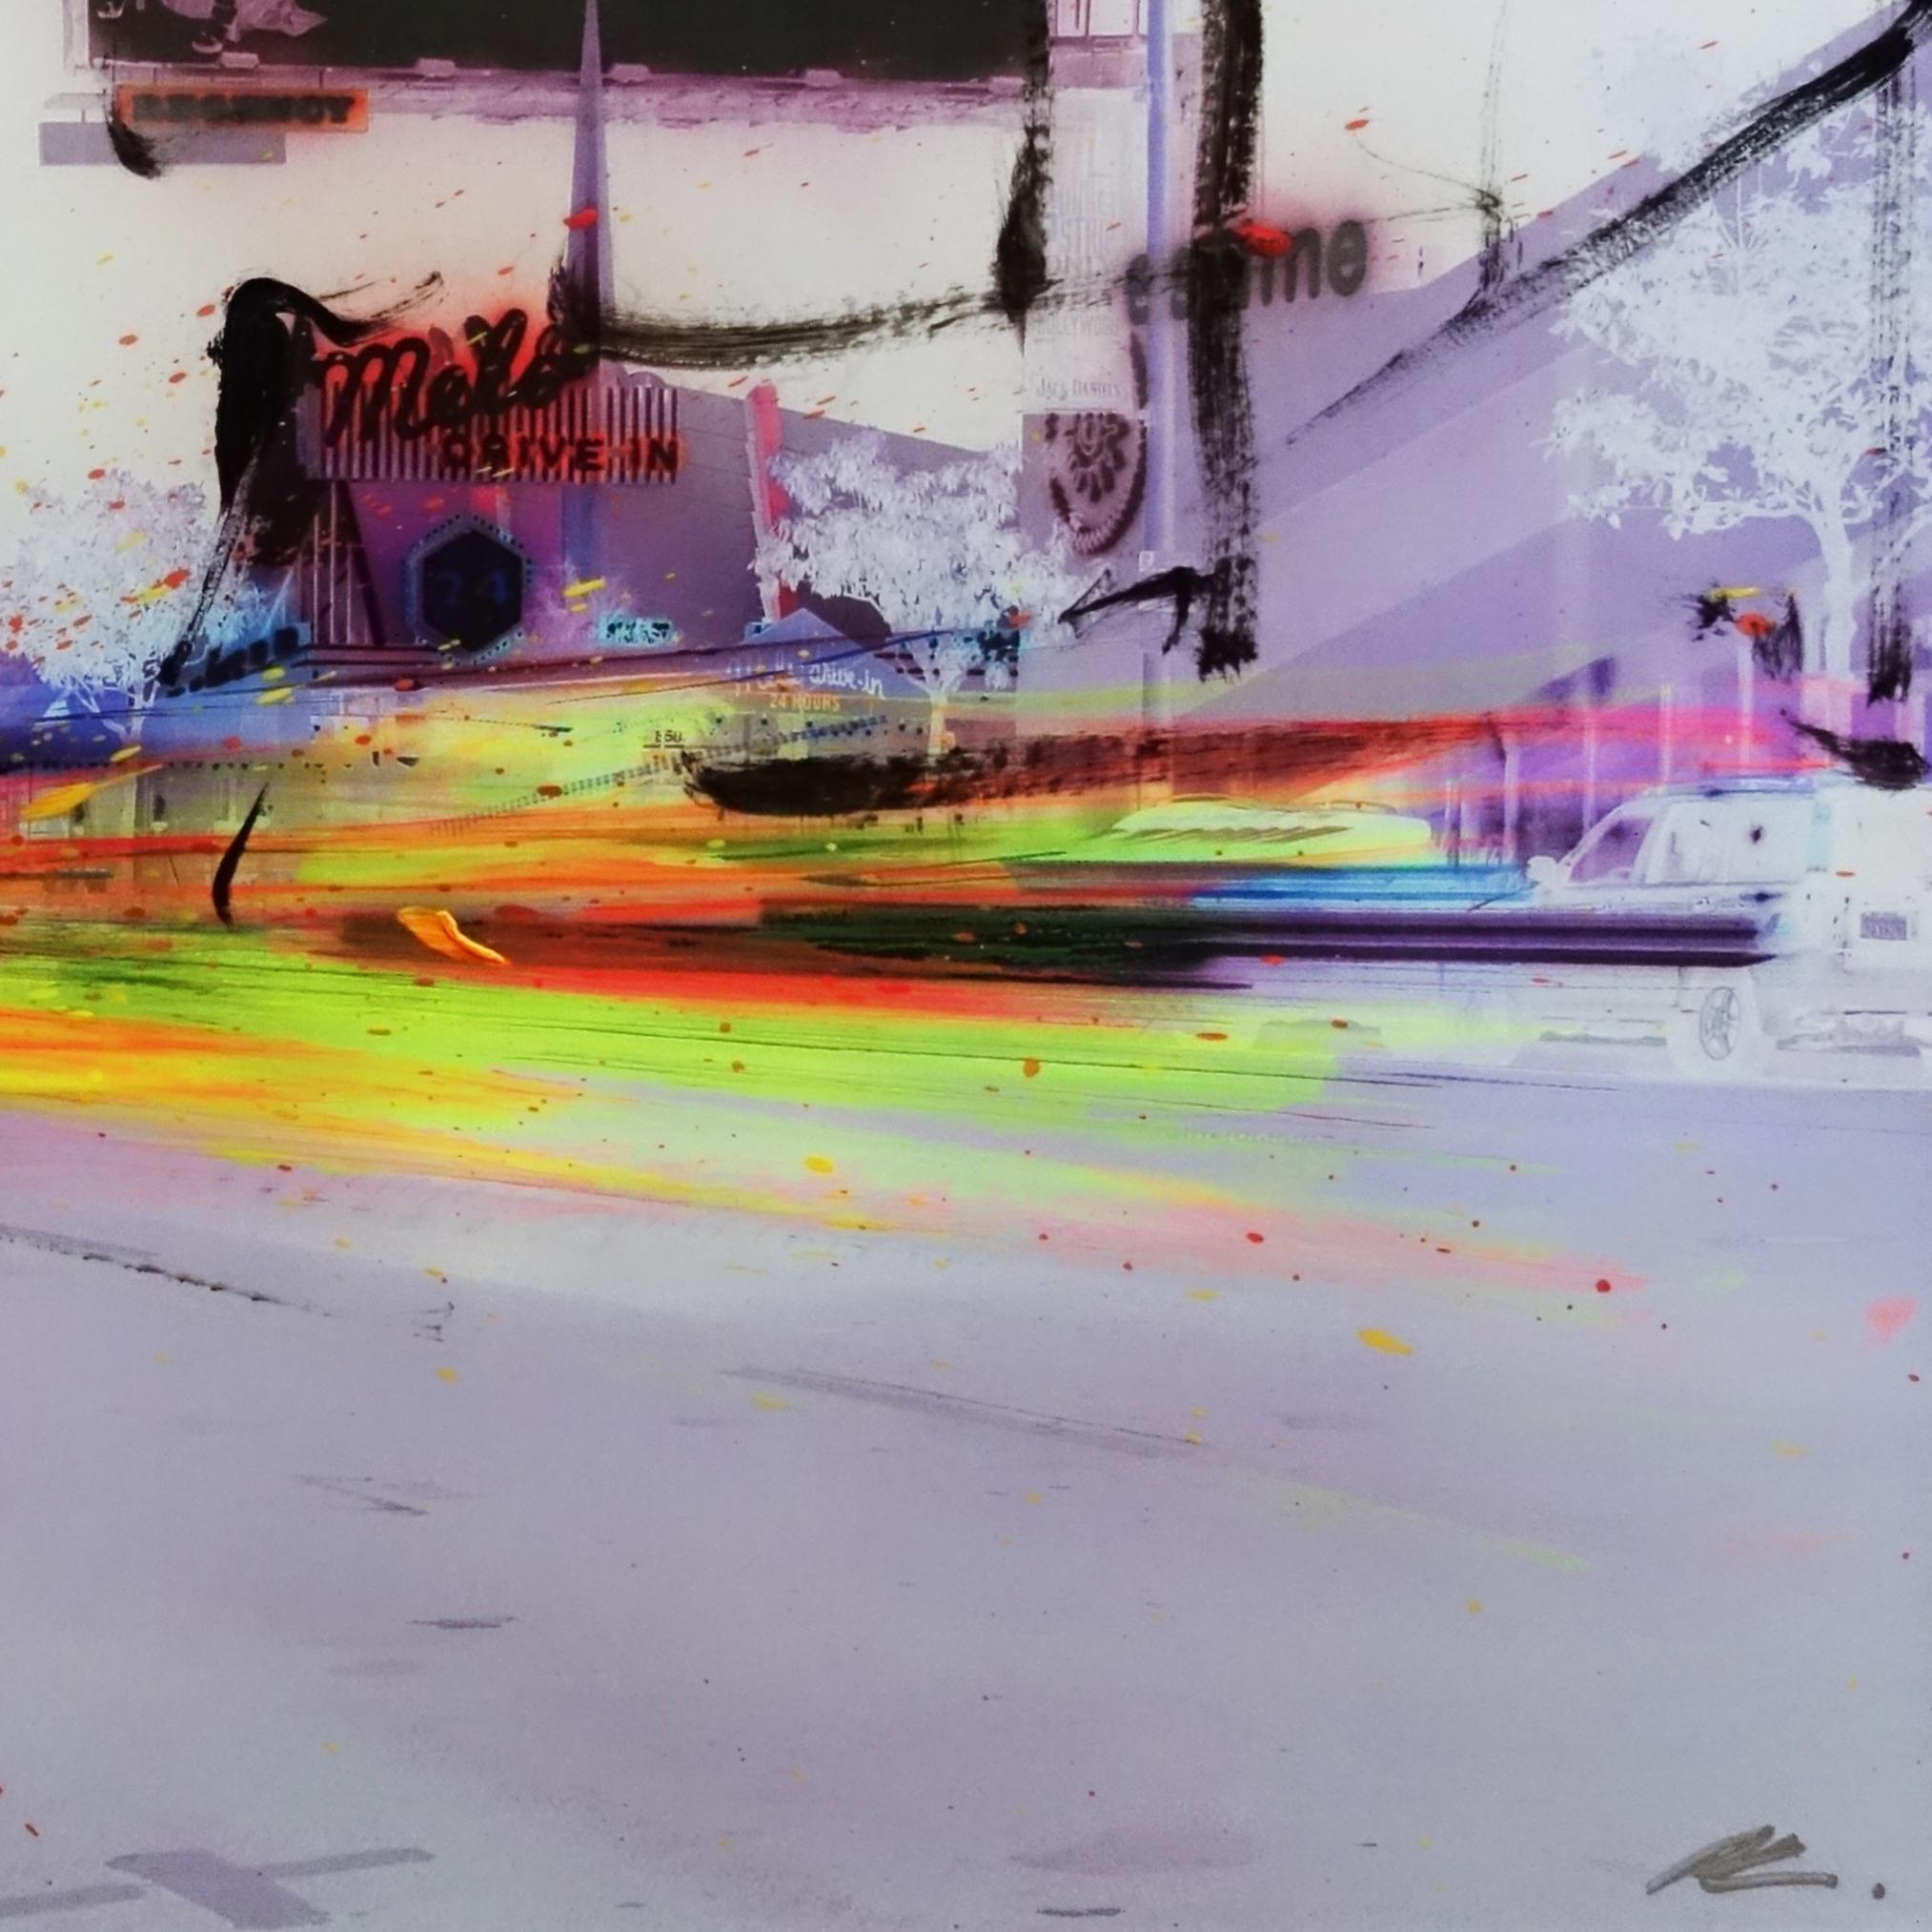 Pete Kasprzak’s passion for city life is expressed in his dynamic urban artworks. Kasprzak’s artworks express energy and life with animated brush strokes. He adds dynamic movement and texture with oil and acrylic paint on his mixed media cityscape